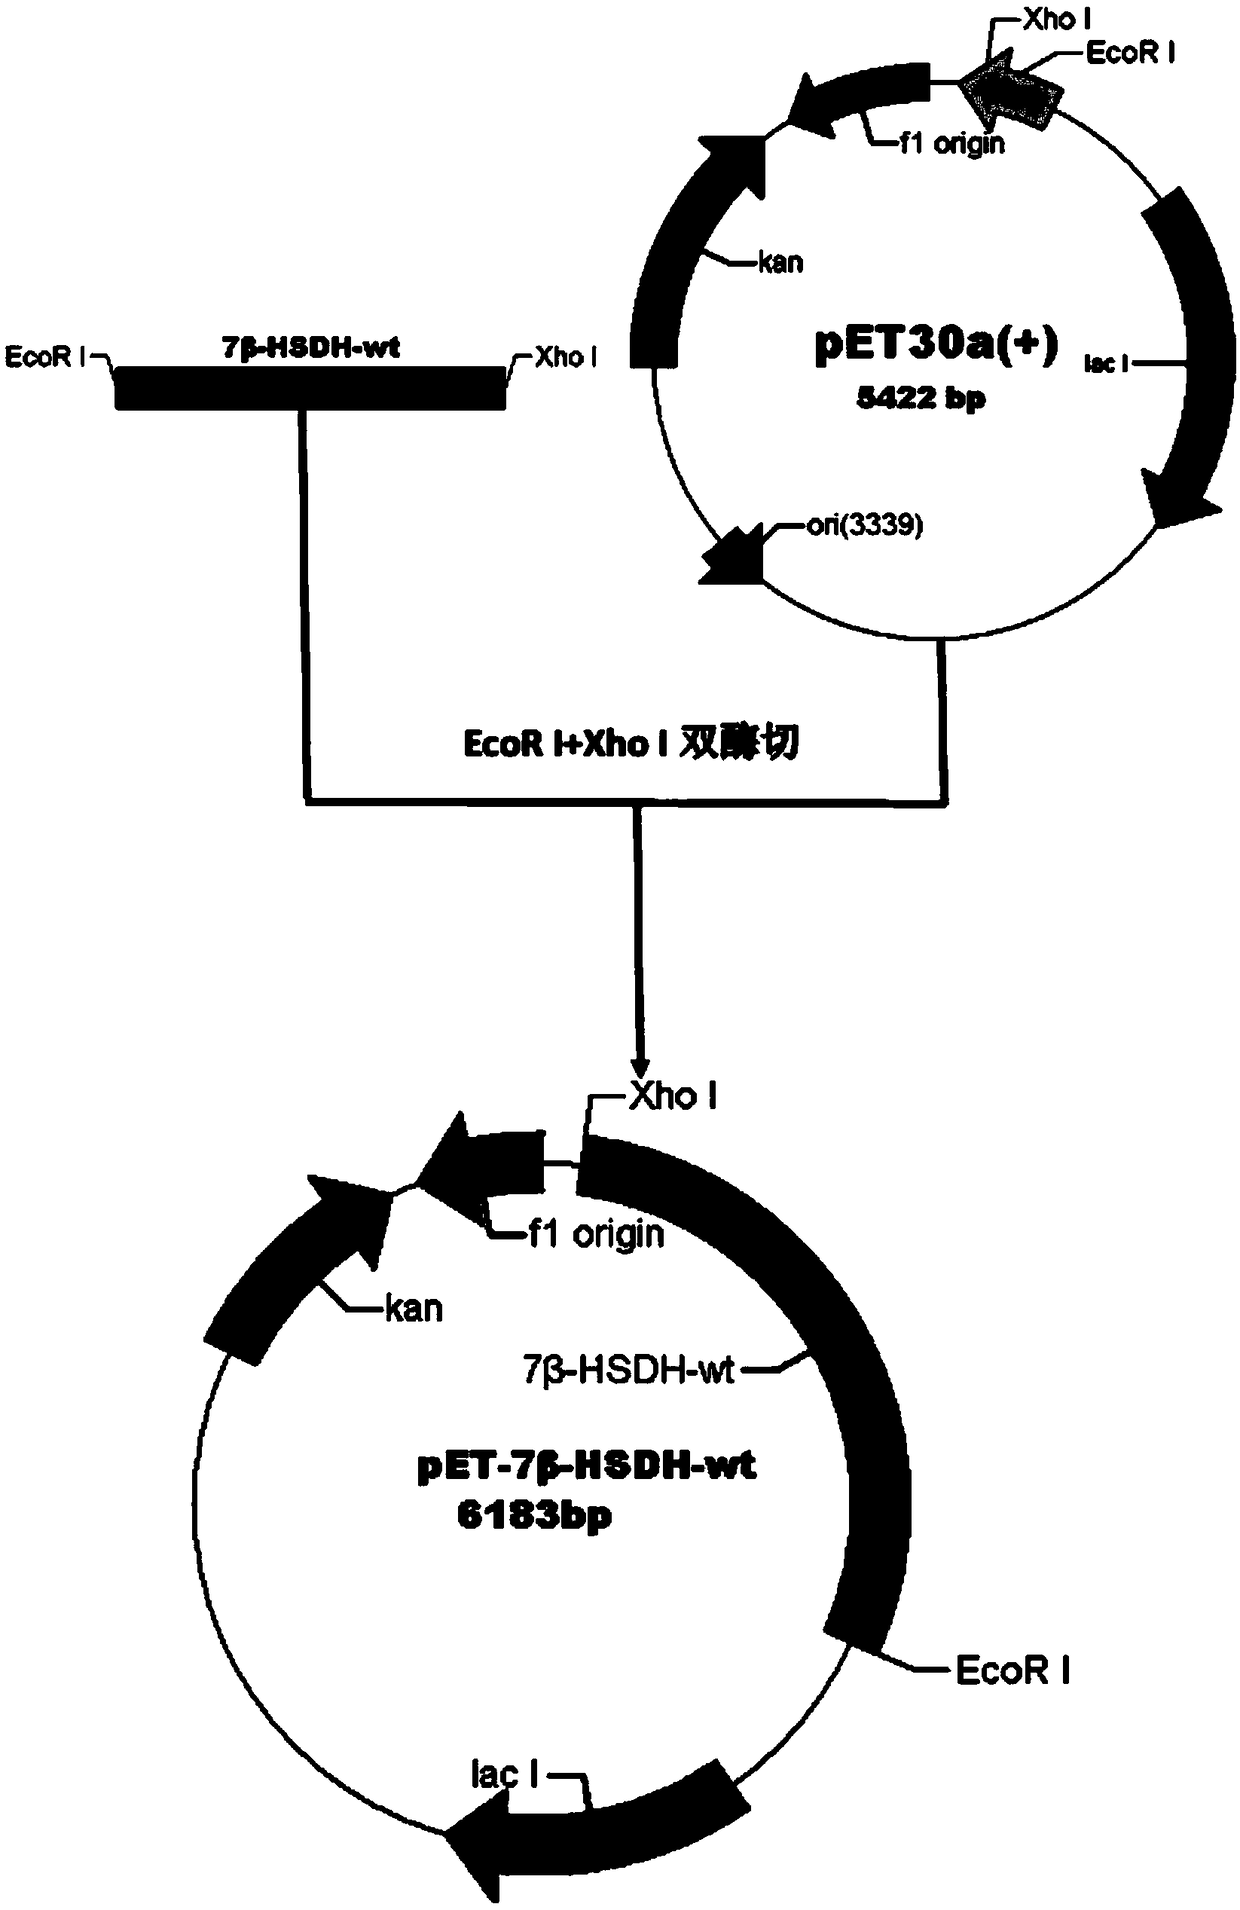 7 Beta-hydroxysteroid dehydrogenase mutant, coding sequence, recombinant expression vector, genetically engineered bacterium and application thereof